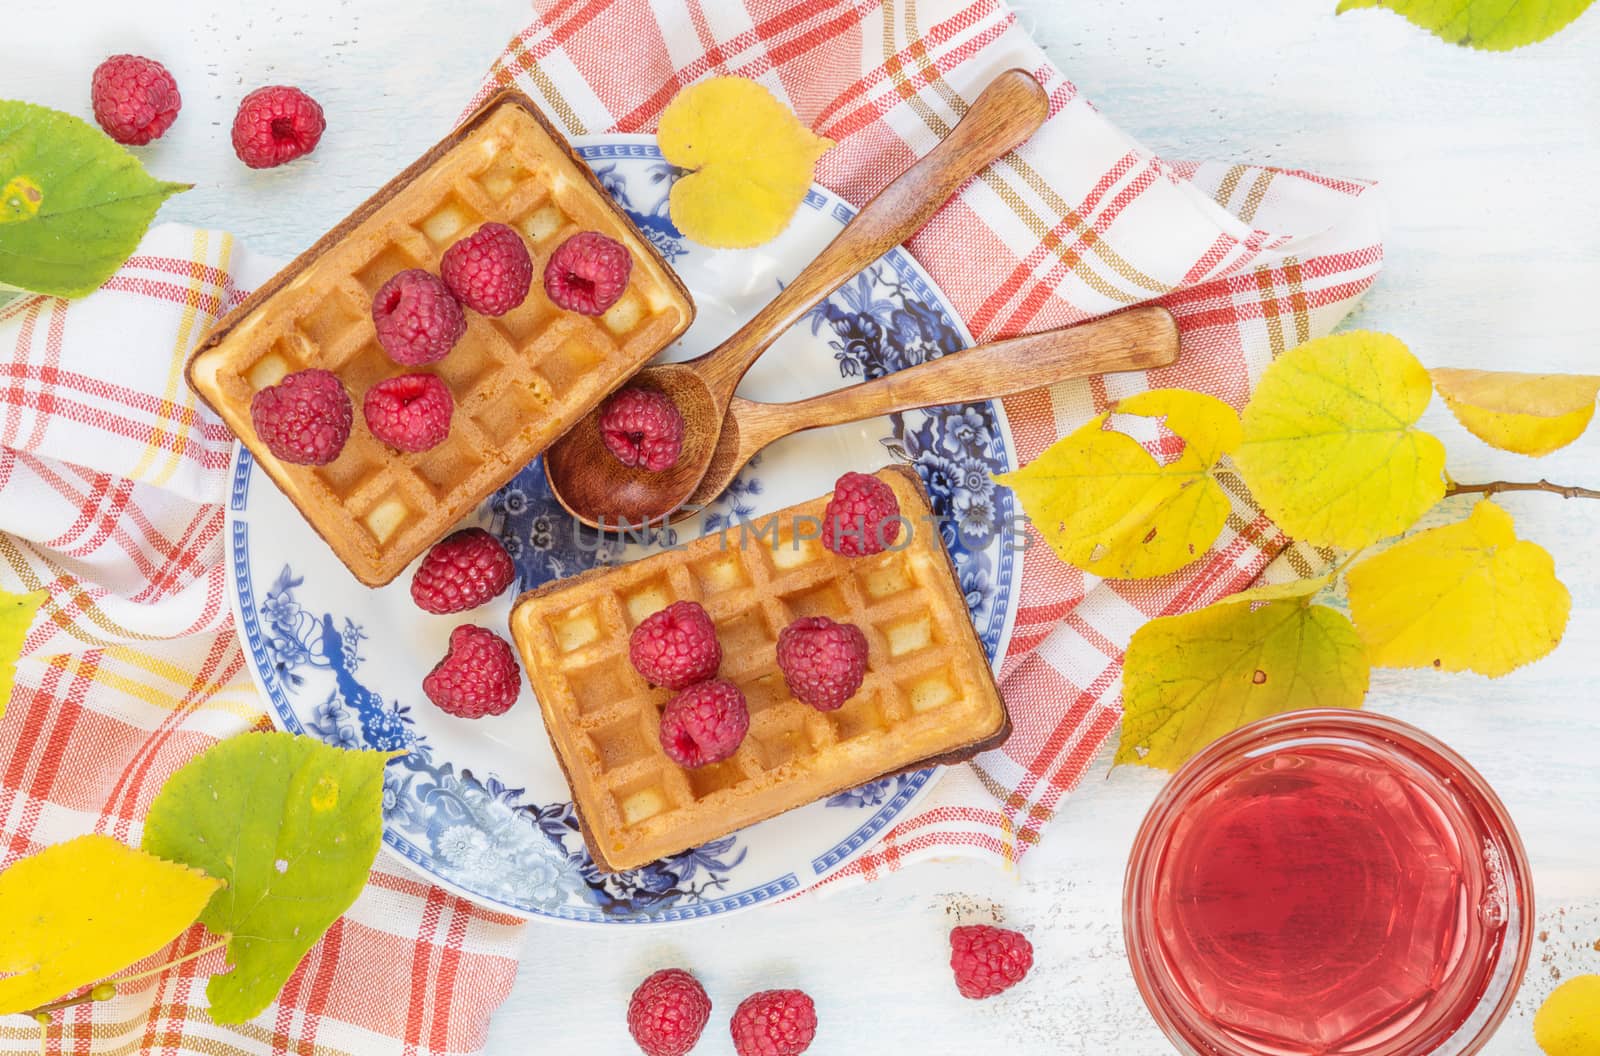 Autumn breakfast with waffles and tea by Epitavi